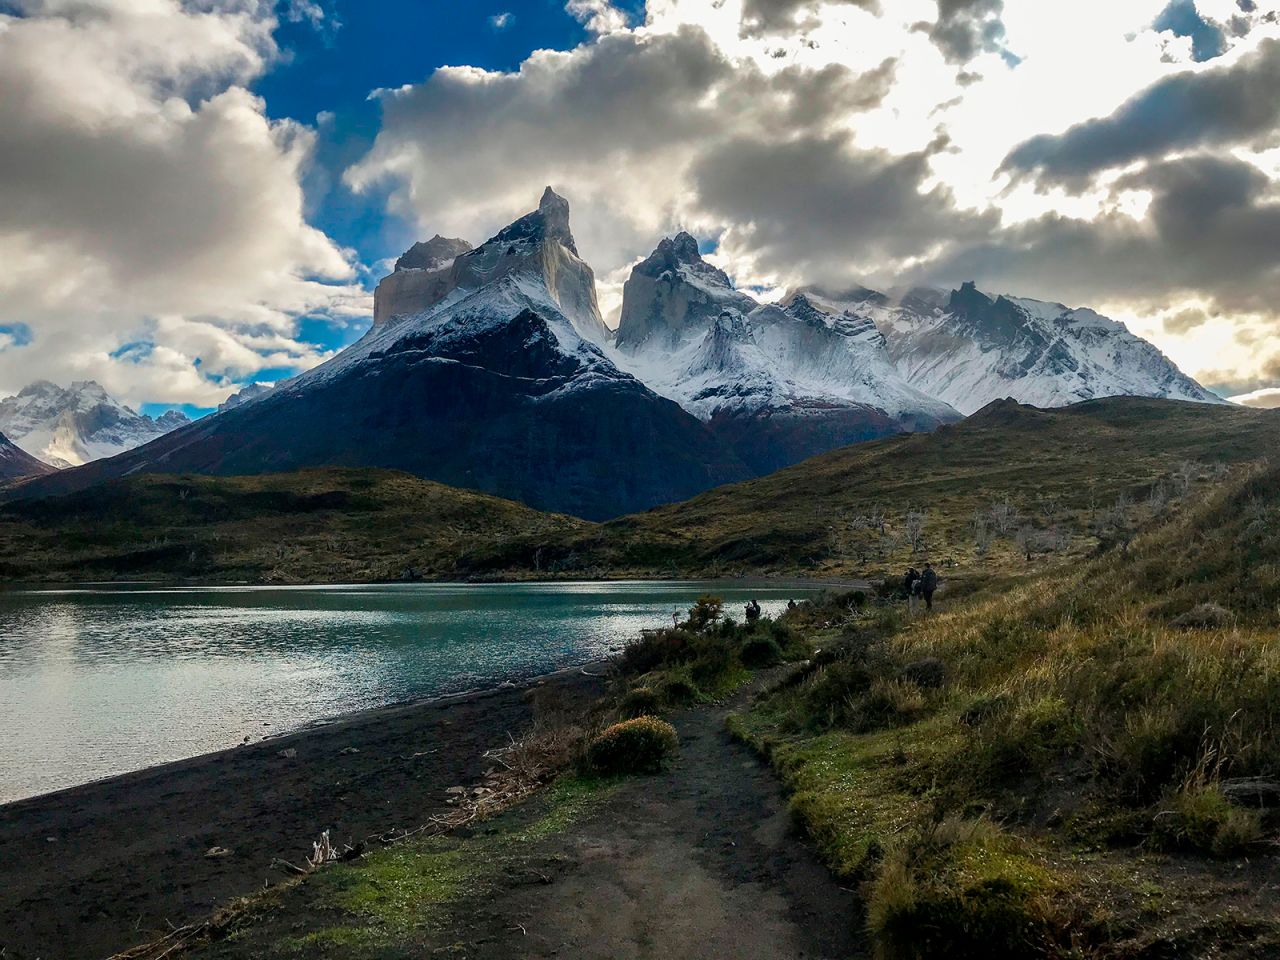 Torres del Paine National Park is located in Chilean Patagonia.